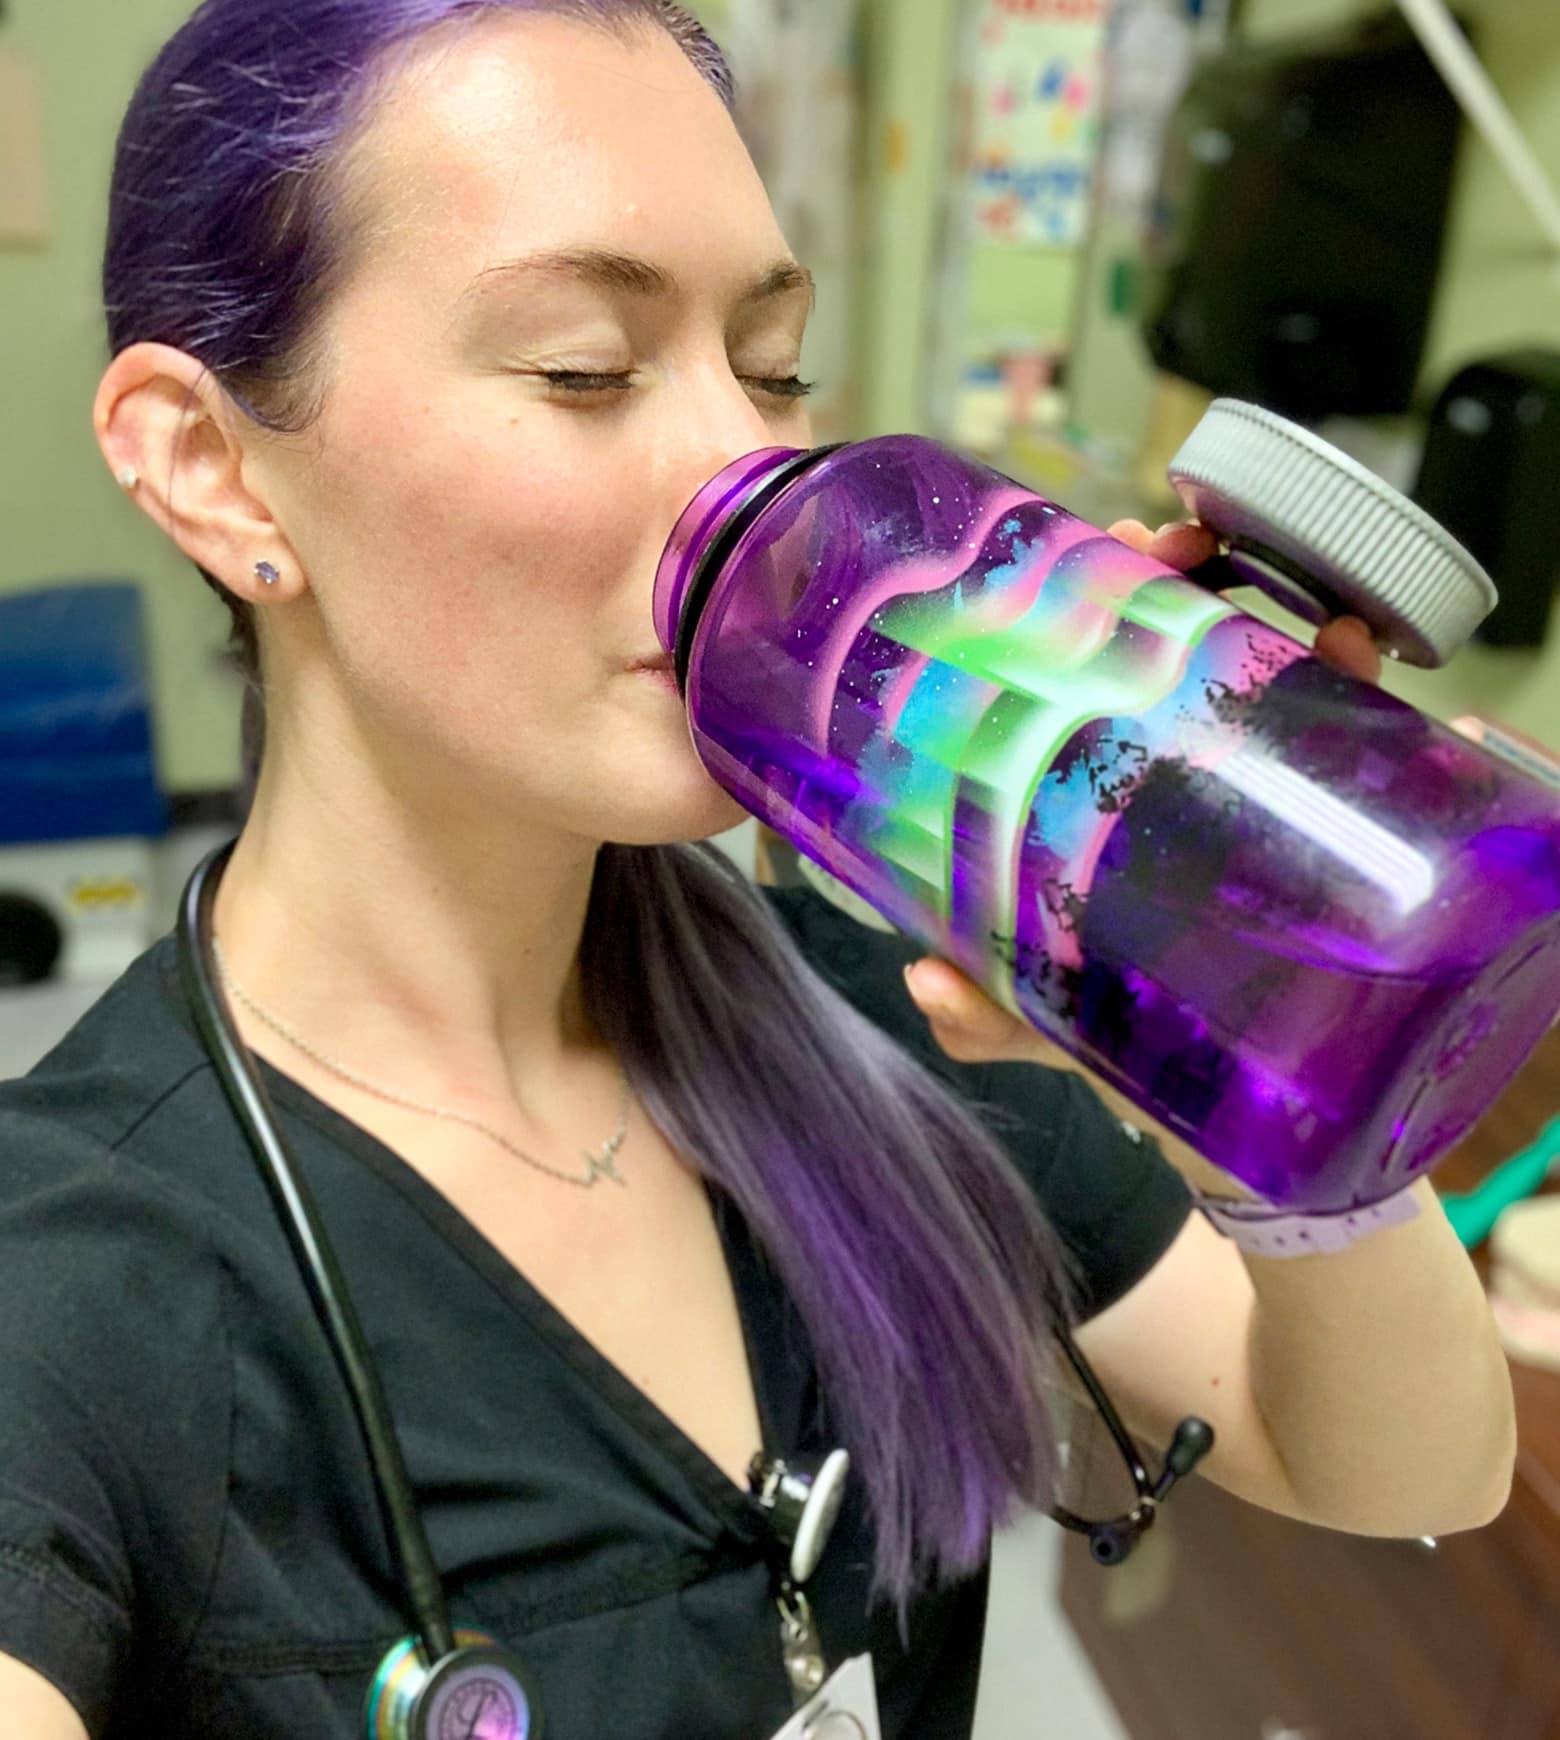 image from nalgene website of woman drinking from a water bottle